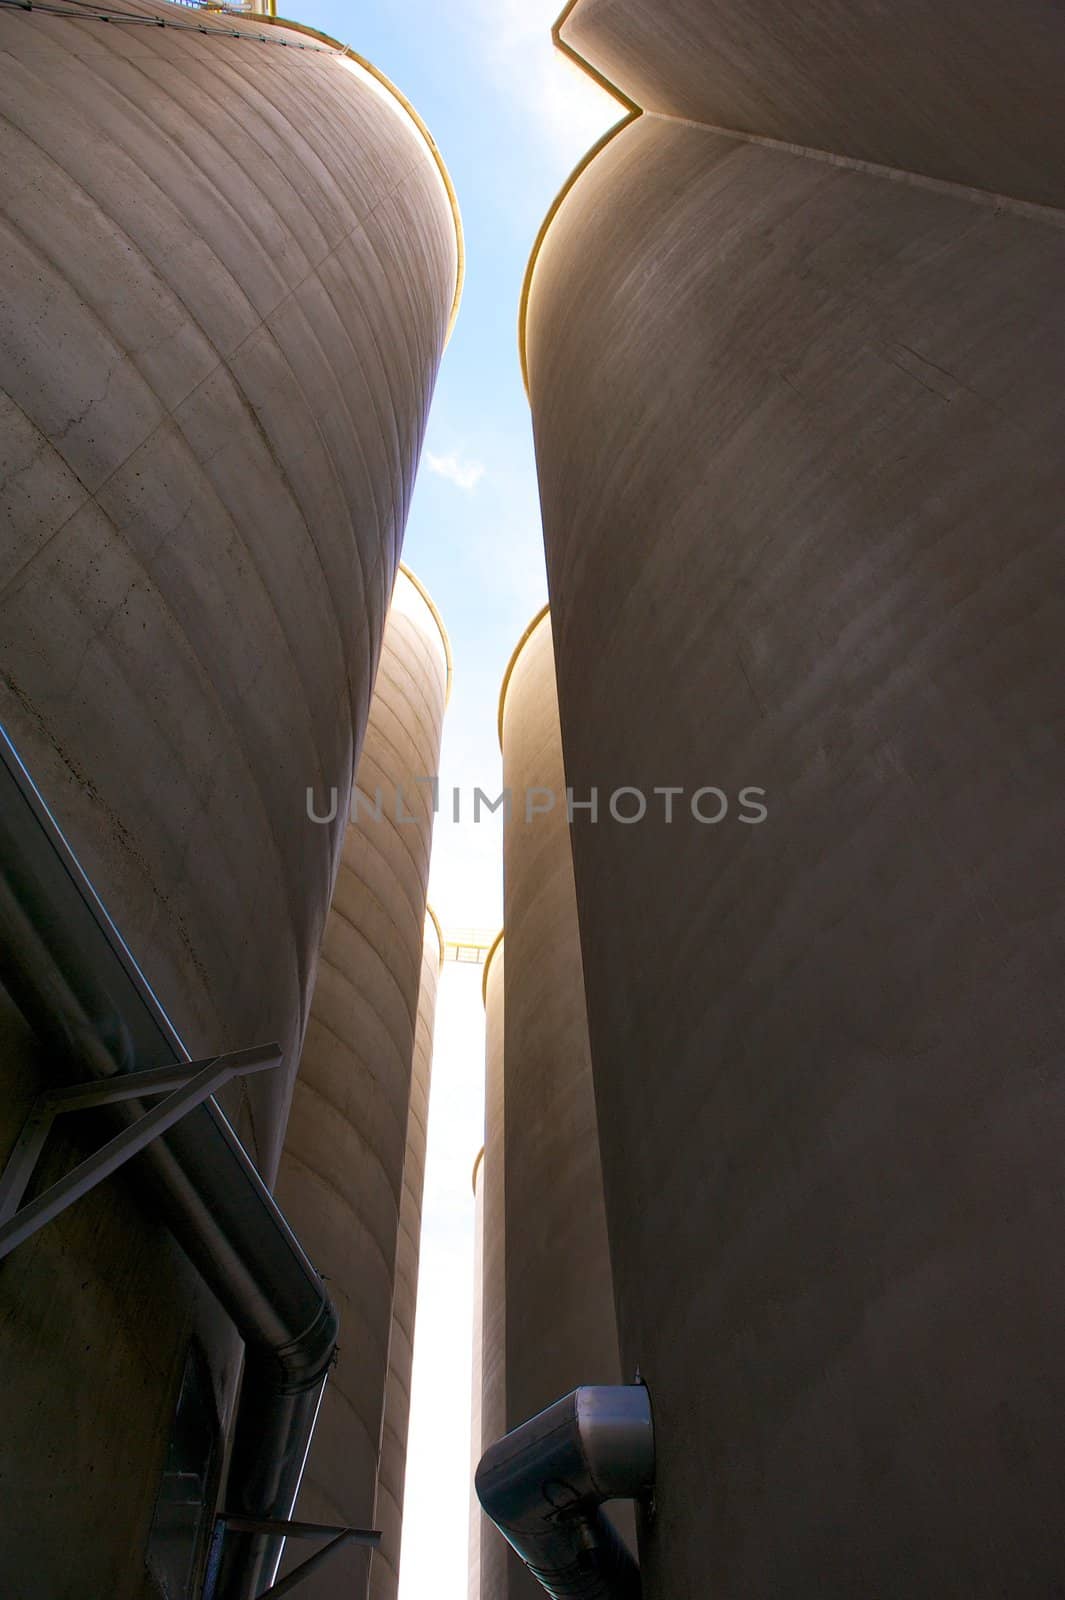 Vertical shot of two rows of towering grain silos made of concrete with metal conduits at a food processing plant